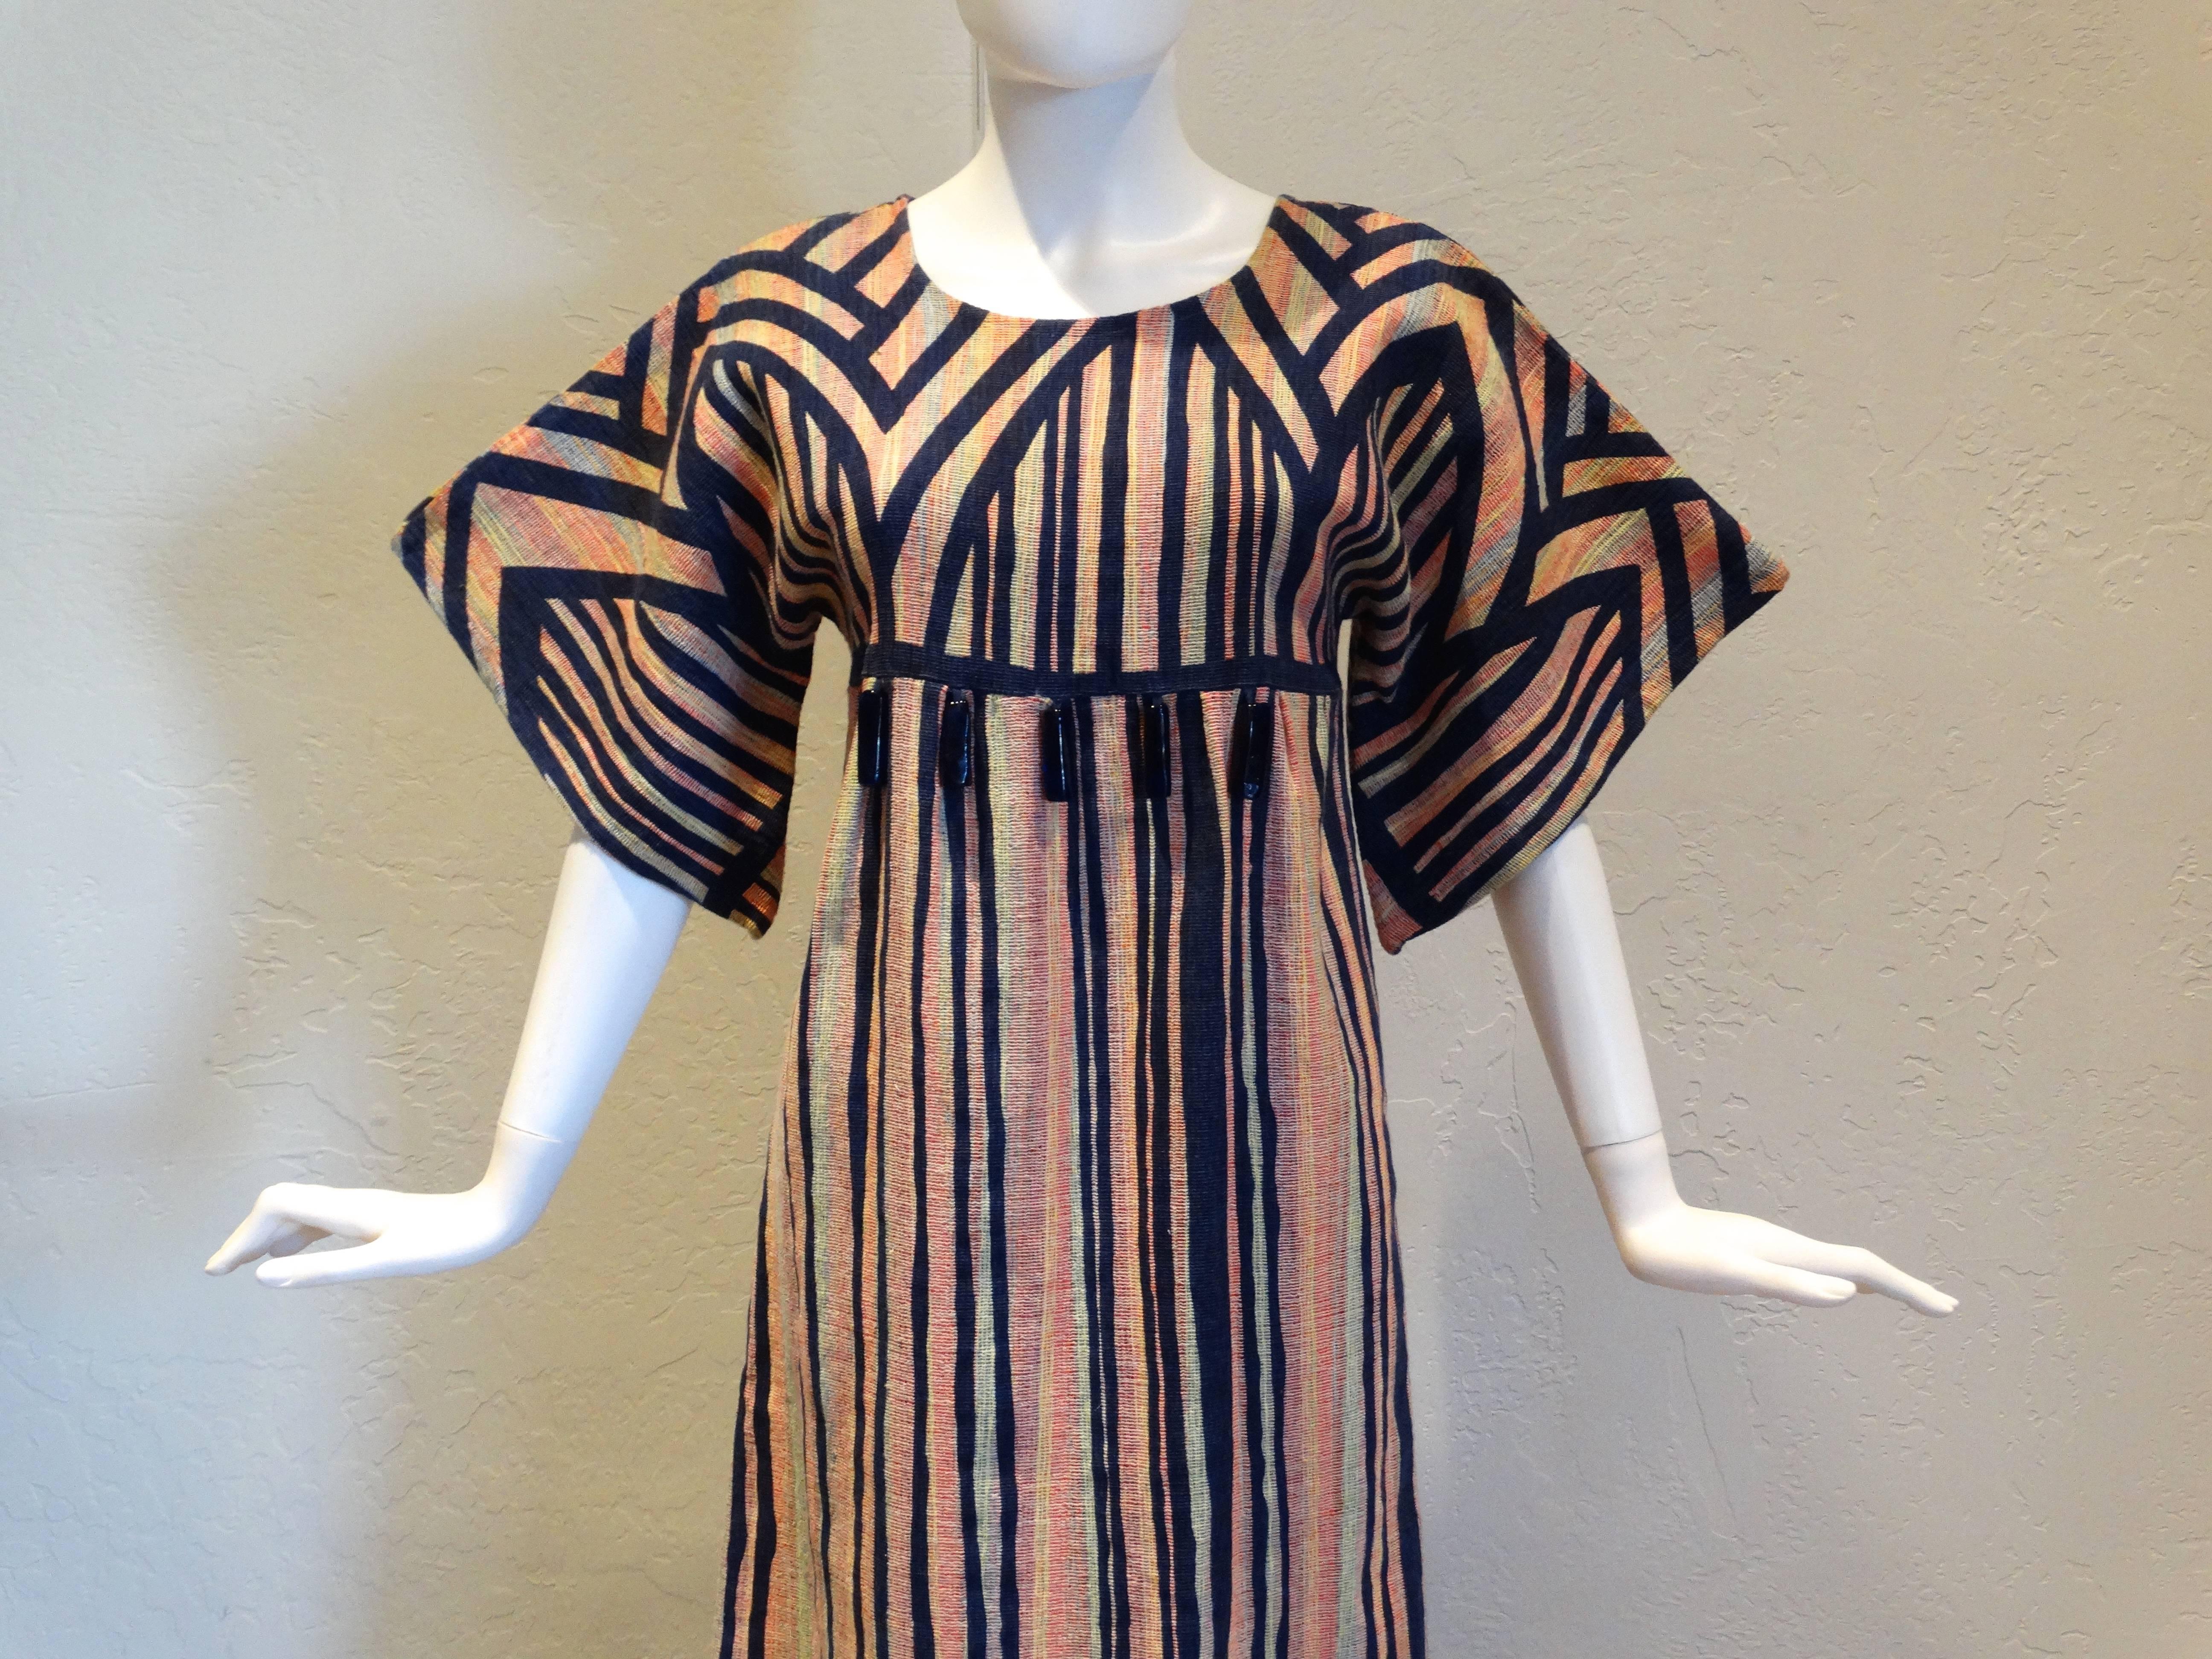 Fabulous bohemian dress circa 1970's by the iconic Israeli RIKMA brand.
The cotton is woven with multiple colours creating a an ethnic folky look. 
The fabric is overprinted with a dark blue line / stripe pattern.There are five solid blue glass